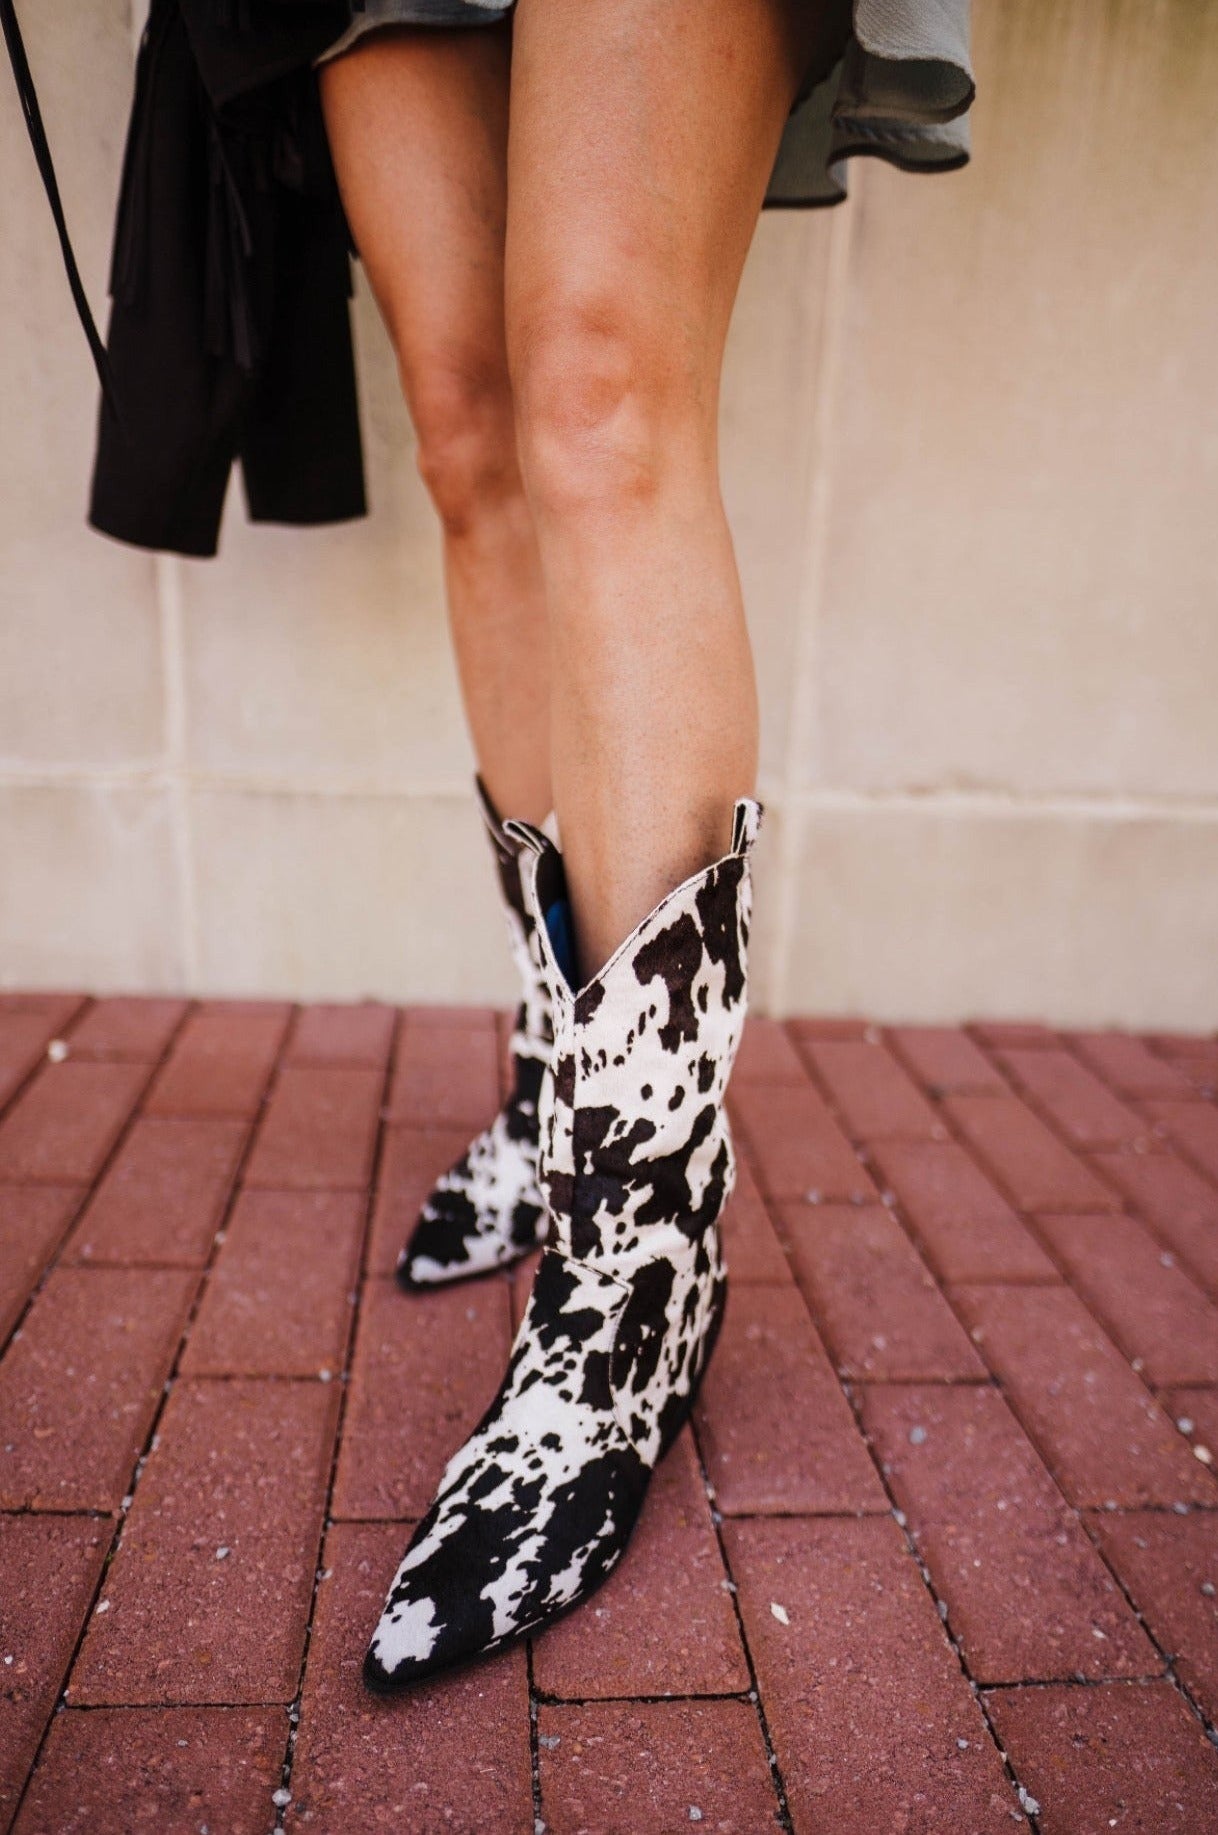 Live A Little Black/White Cow Puncher Print Hair On Hide Boots (DS) DP